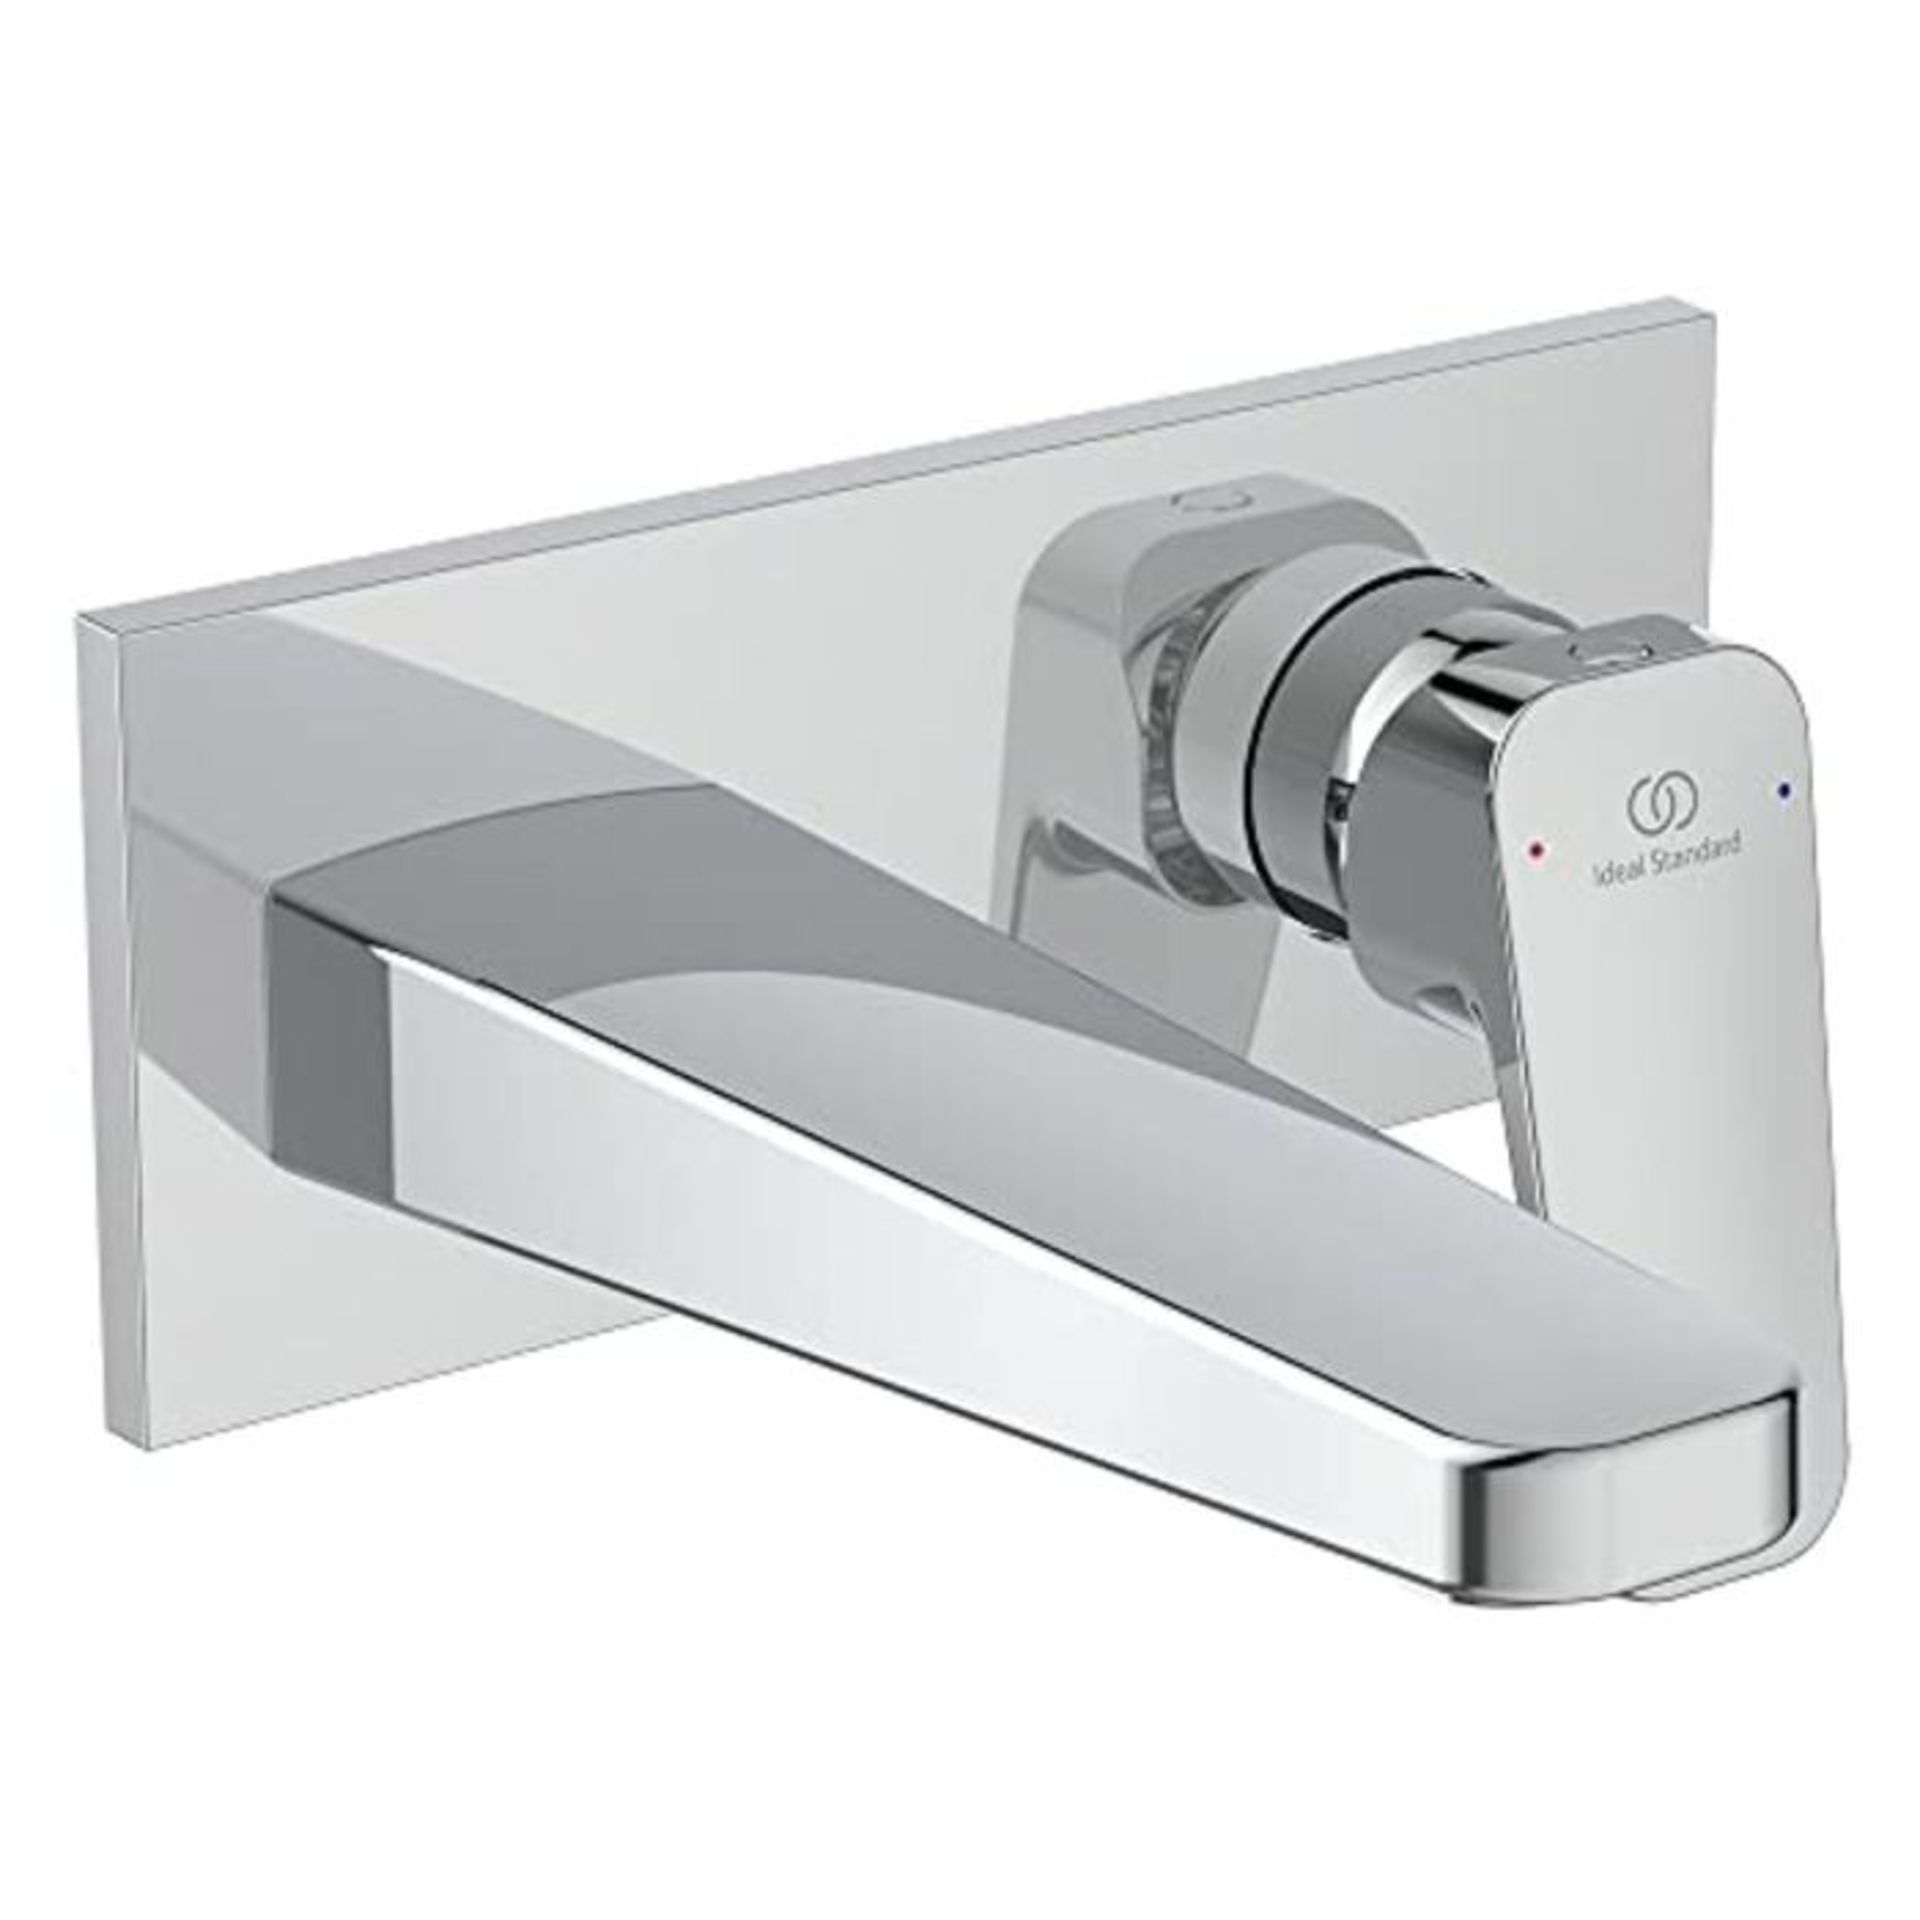 RRP £116.00 Ideal Standard Ceraplan Single Lever Wall Mounted Basin Mixer Tap Chrome